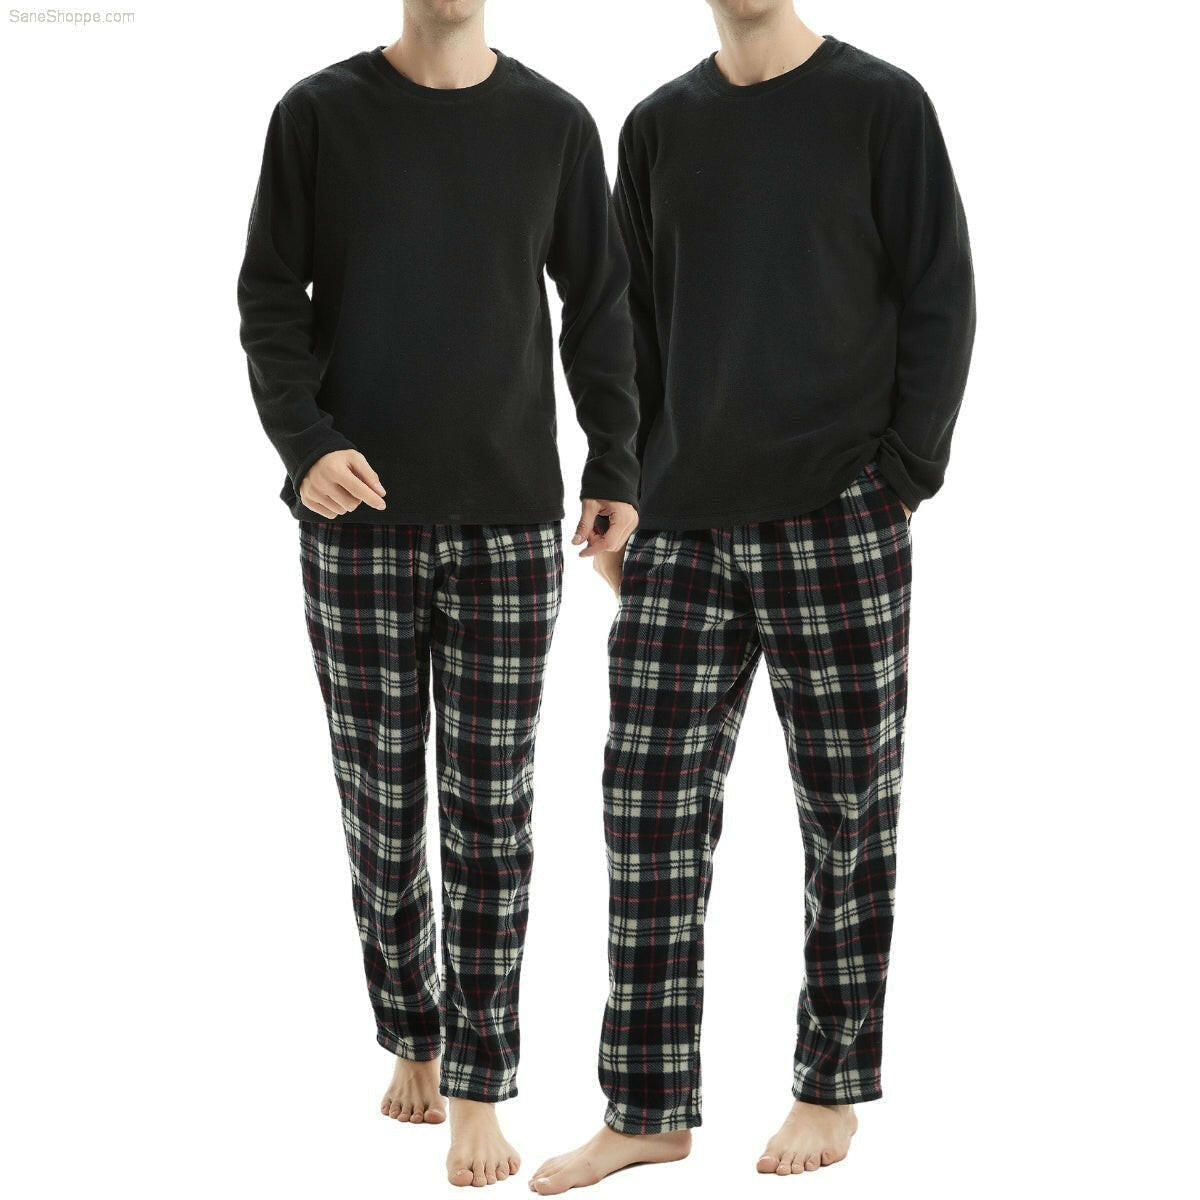 Bohemian Cotton Long Johns Pajama Set For Men Thermal Underwear With  Bottoms, Keep Warm Printed Trousers, And Bodysuit In From Vivian5168, $6.7